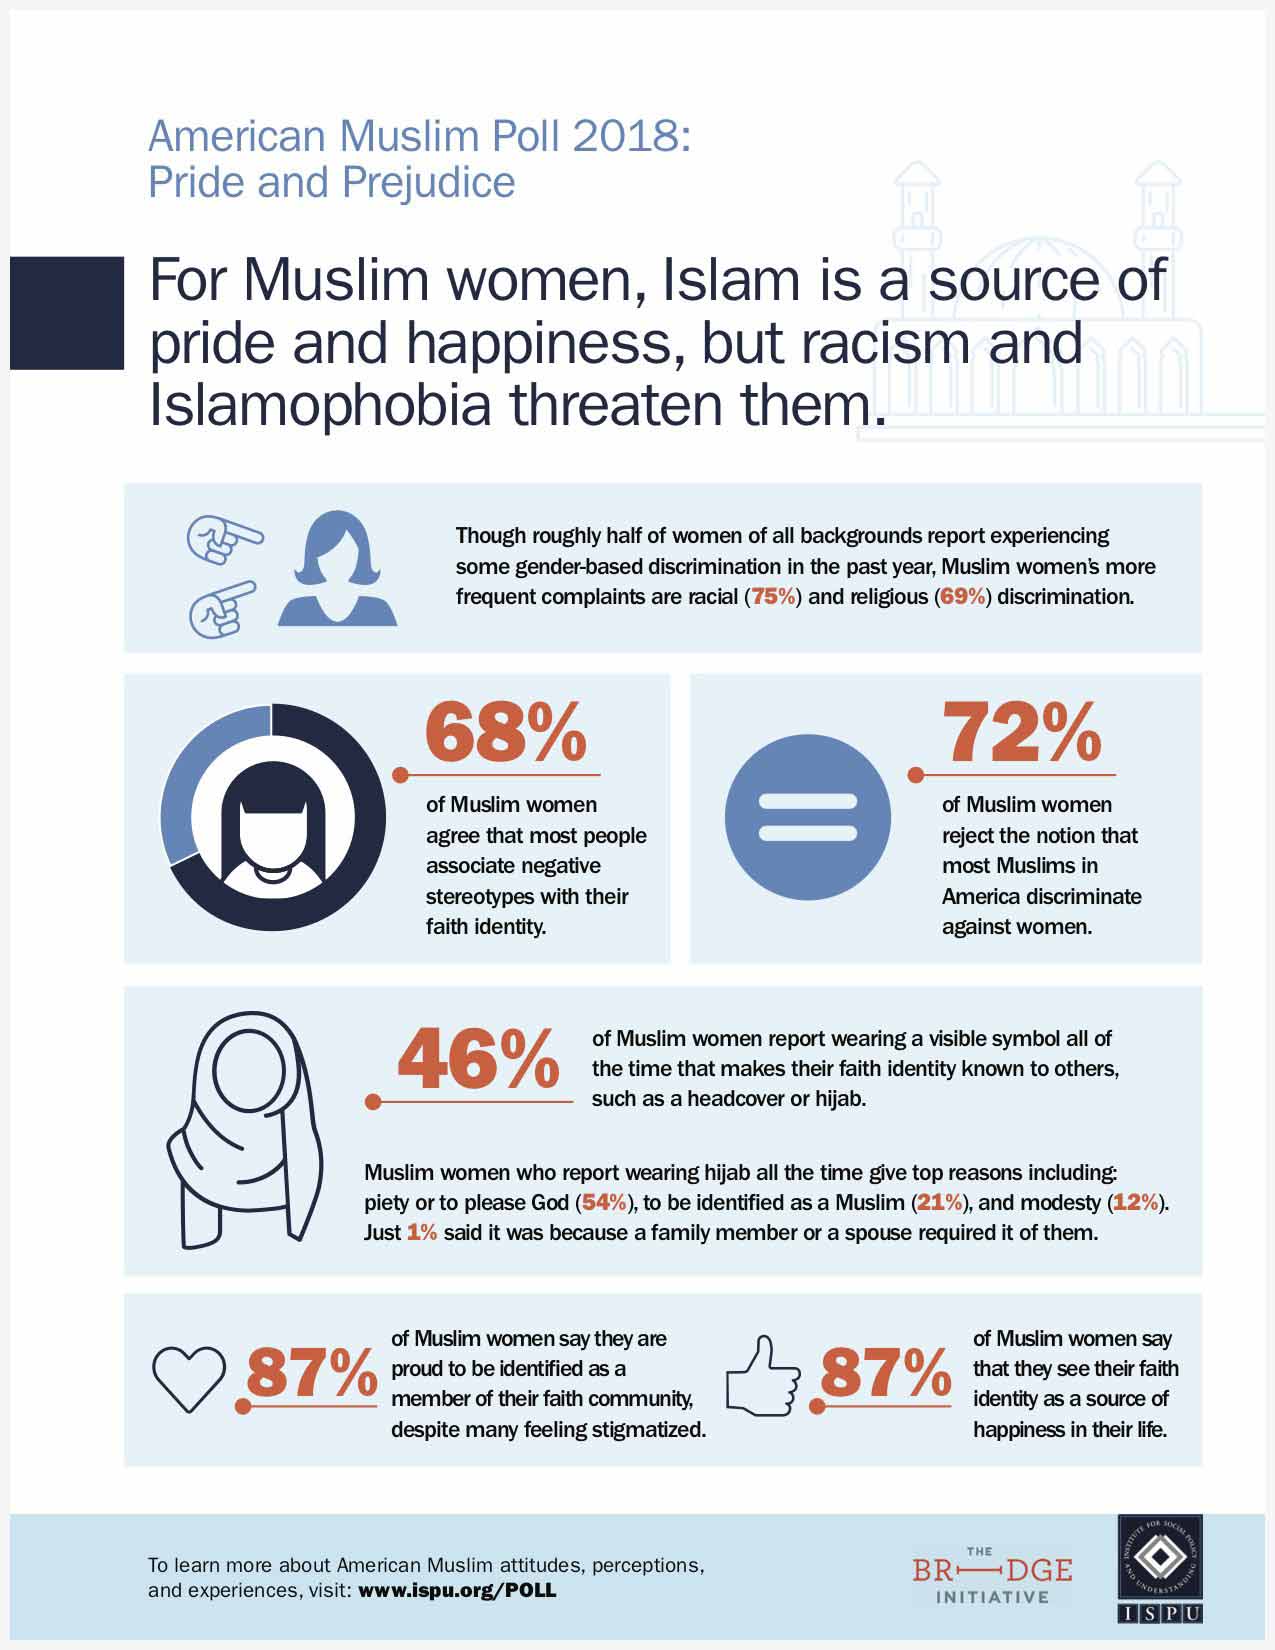 For Muslim women, Islam is a source of pride and happiness, but racism and Islamophobia threaten them infographic